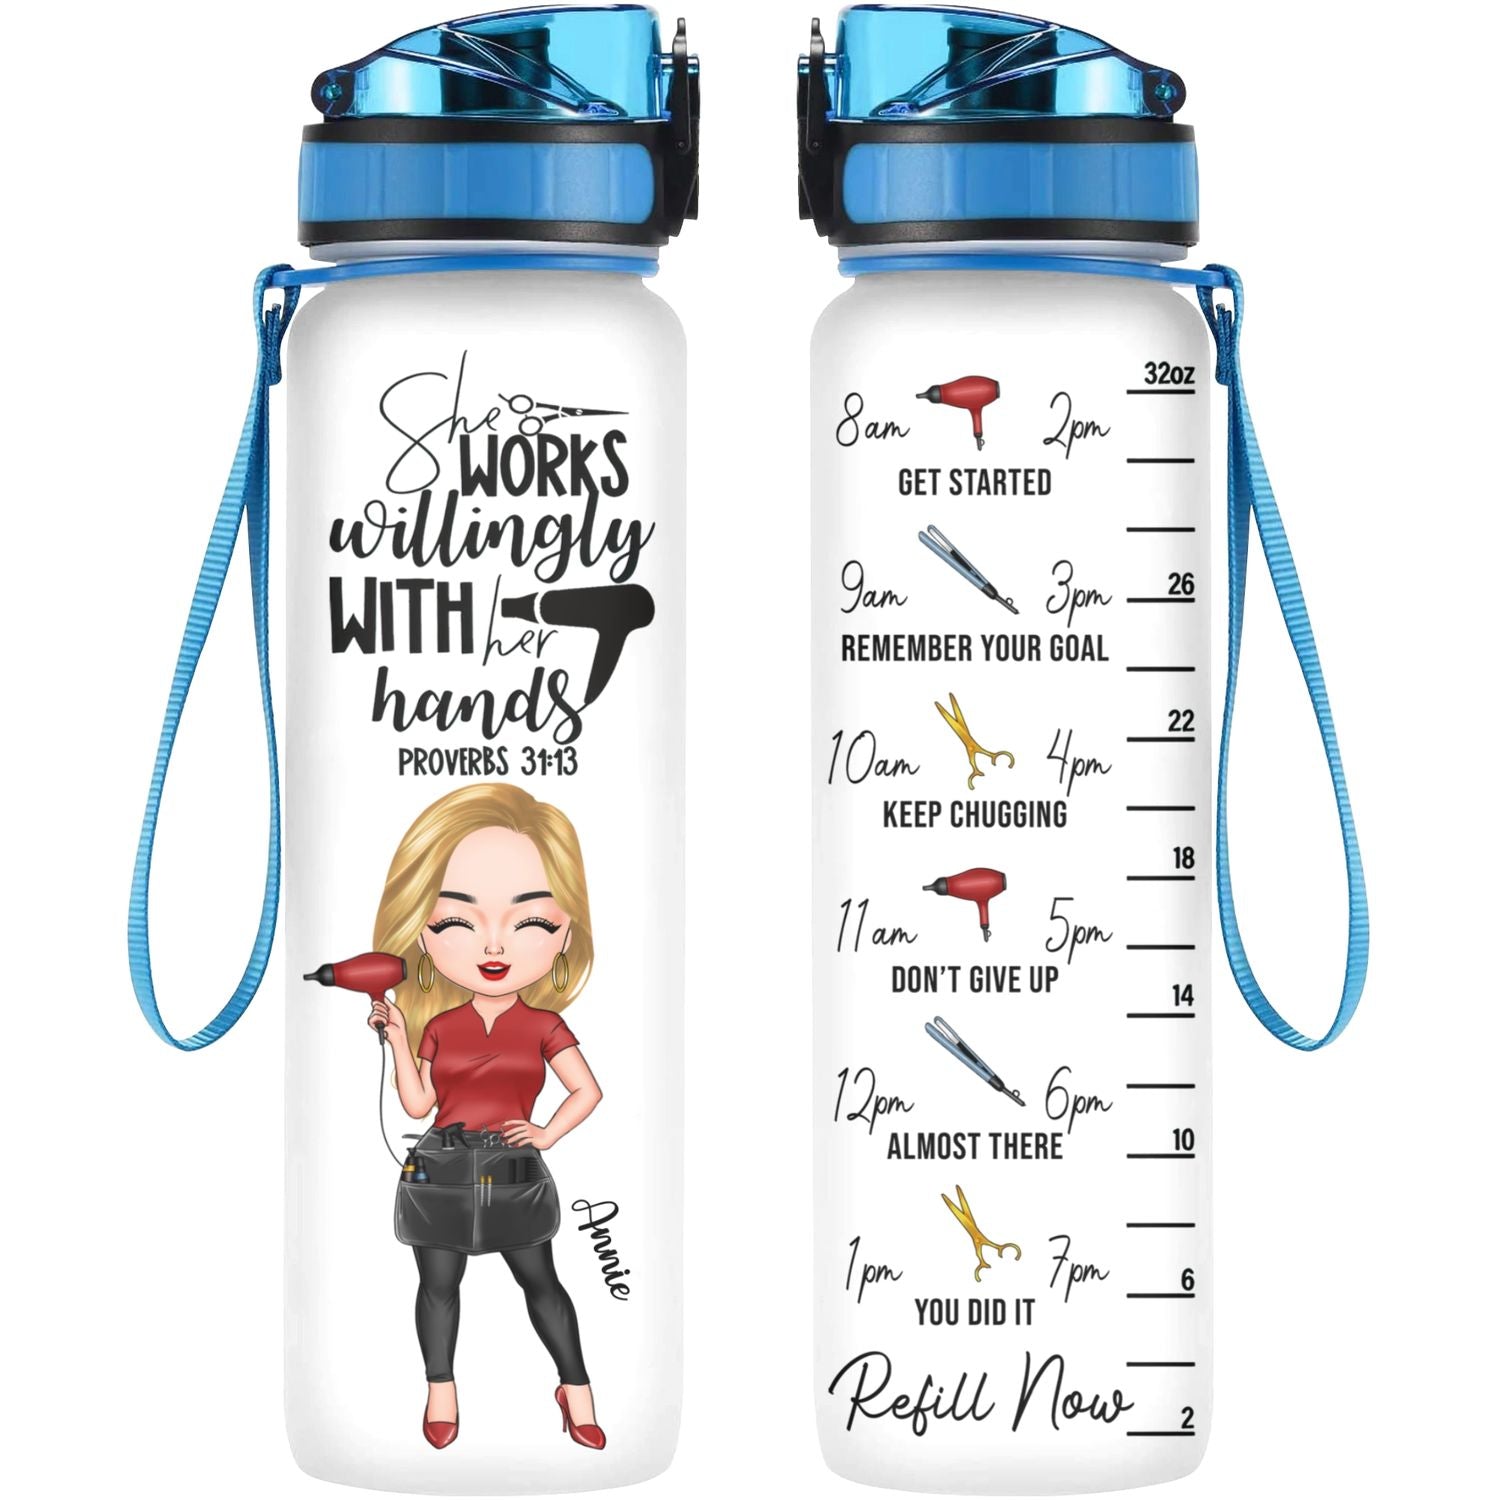 Personalized Water Tracker Bottle - Gift For Hairstylists - With Her Hands